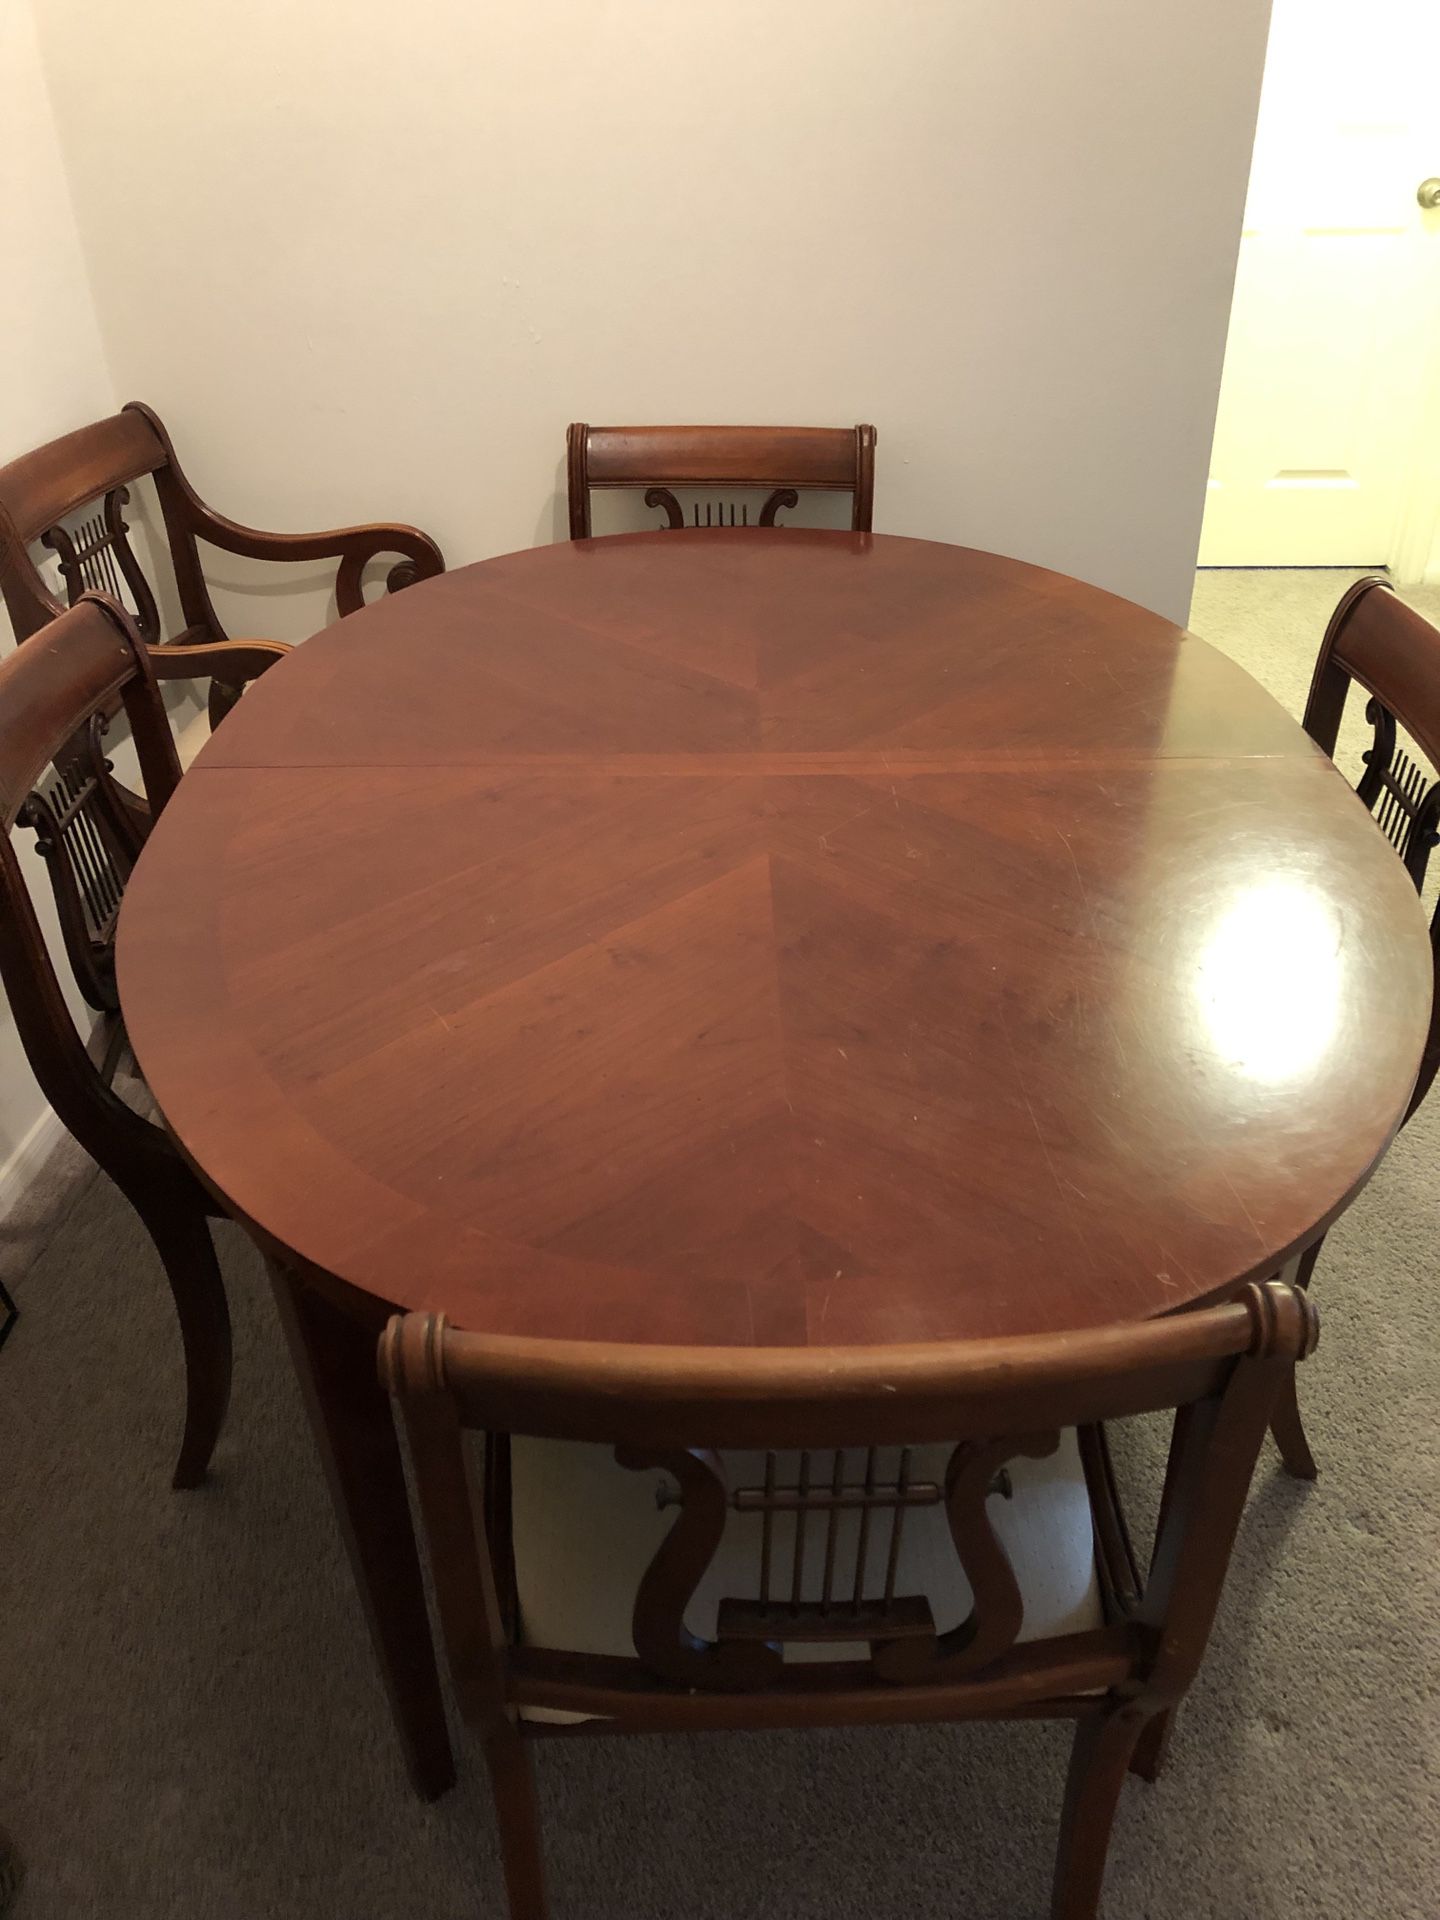 Rose Wood Table (Good Condition) with 6 chains (Good Condition)